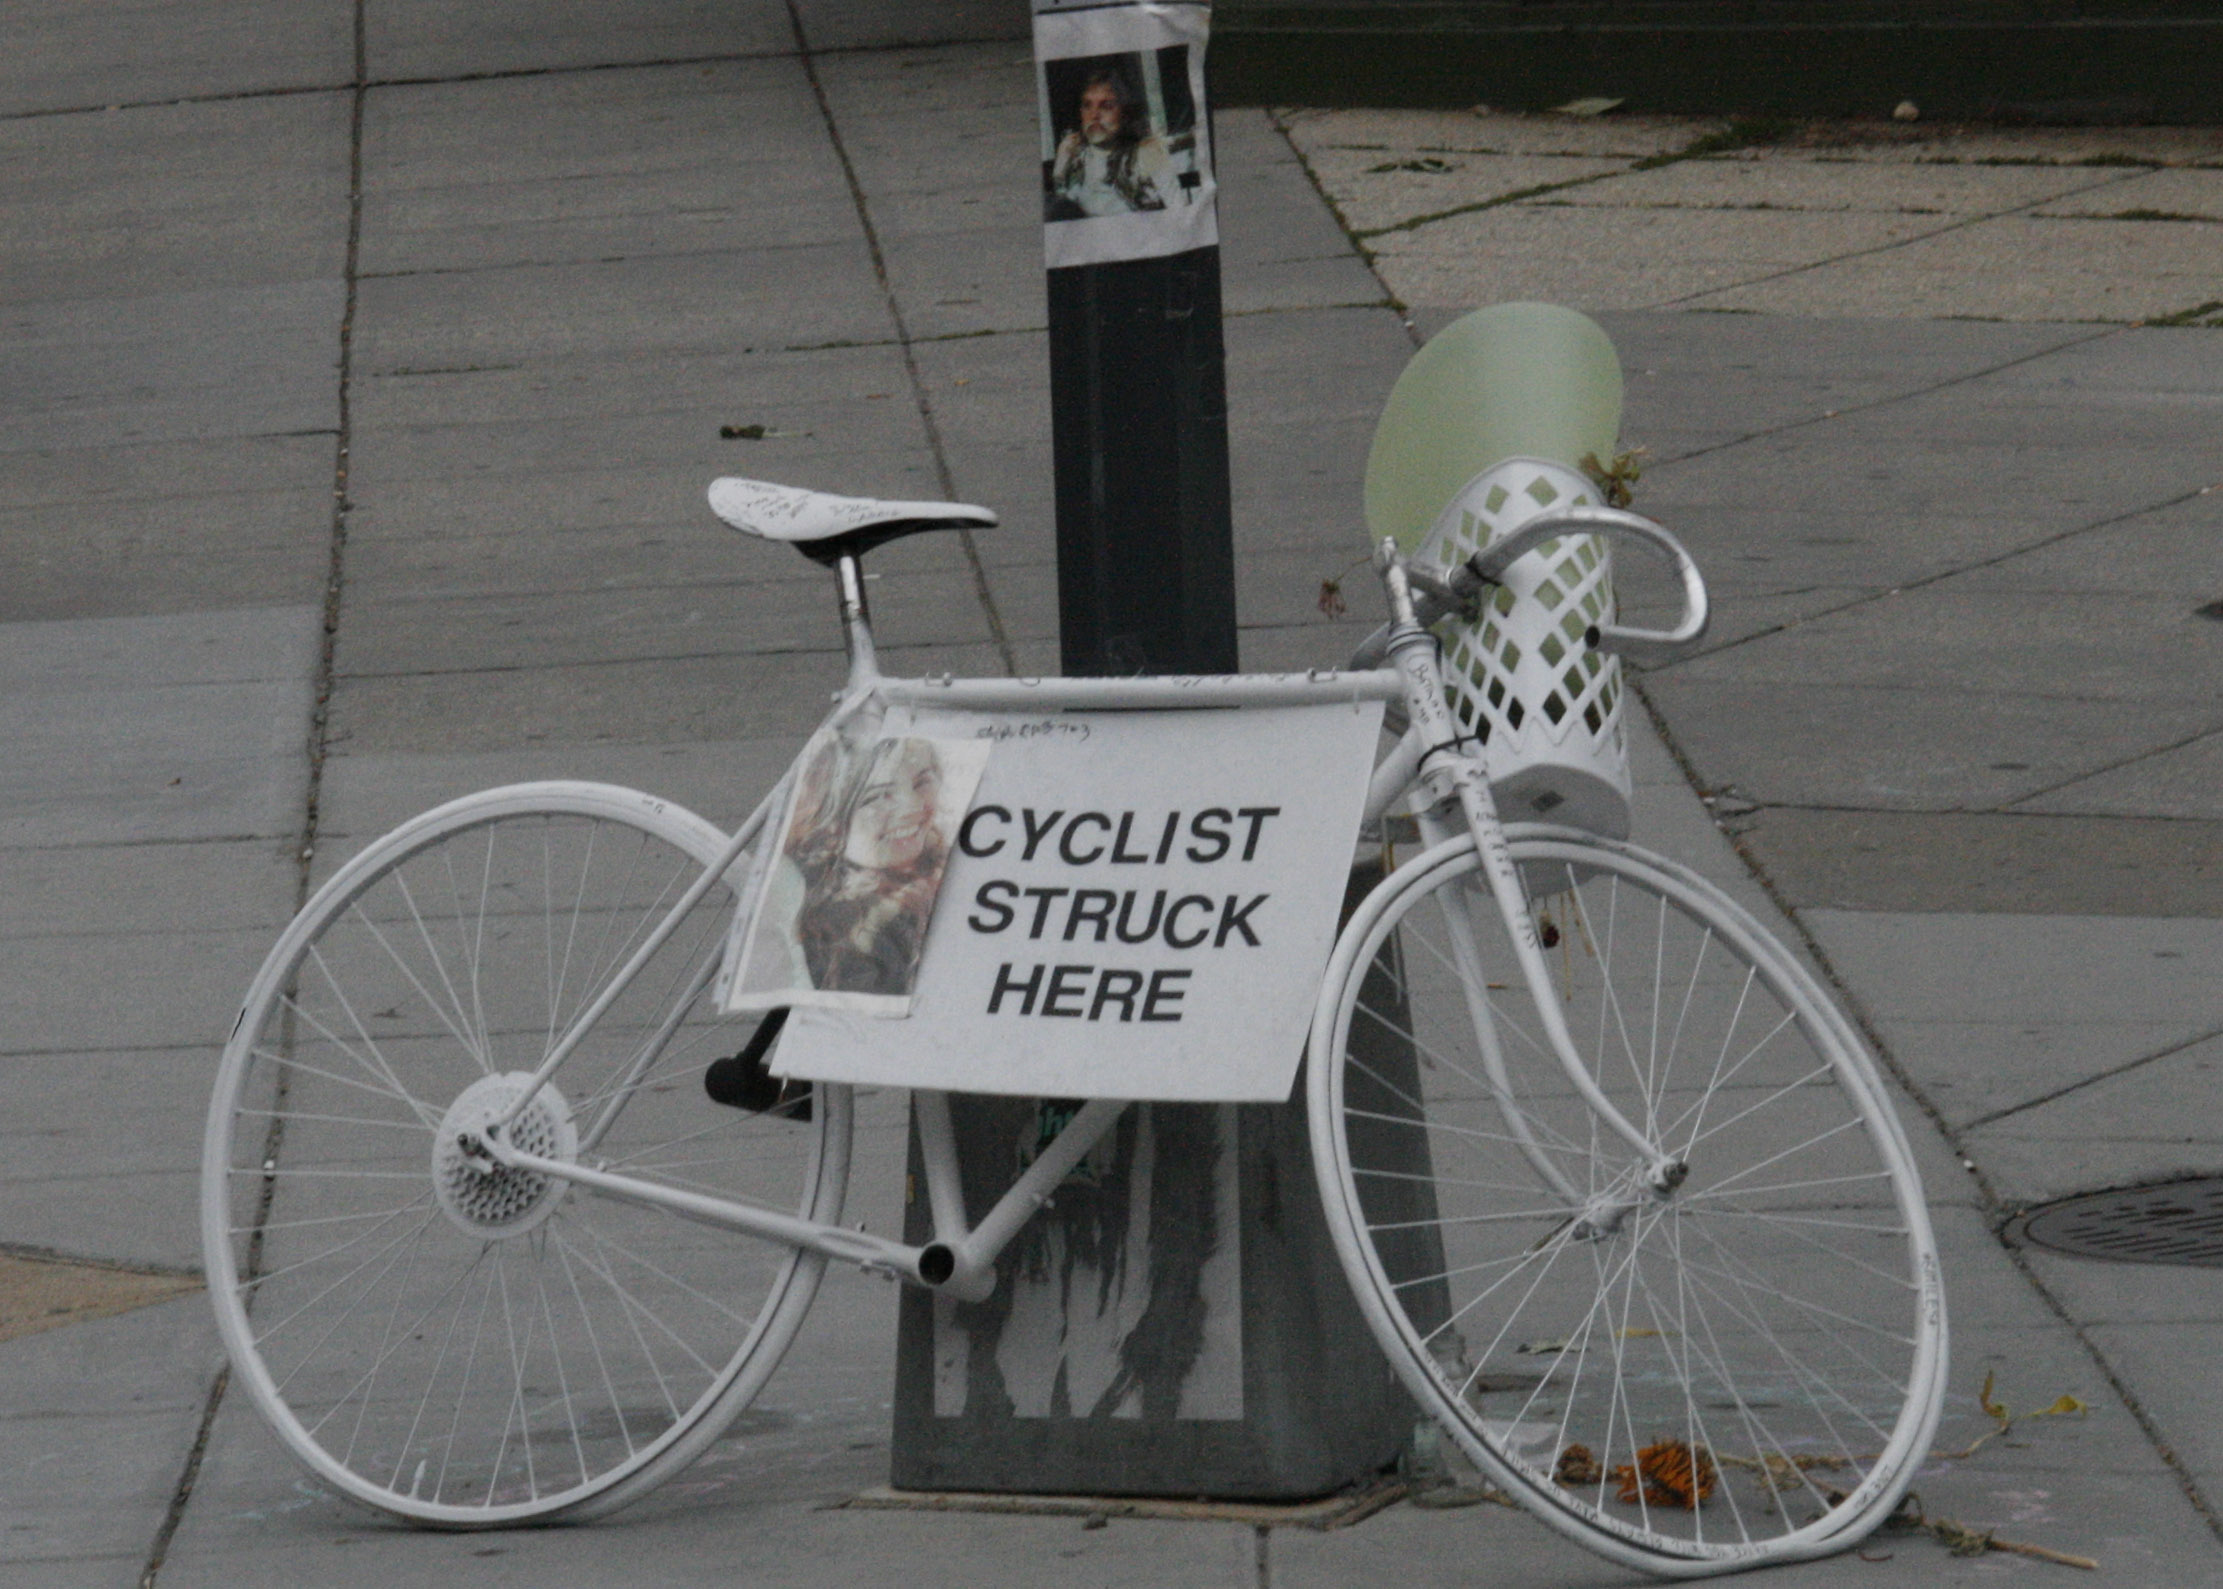 Ghost Bicycle @ 20th/R & Ct. Ave. NW in Memory of Alice Swanson